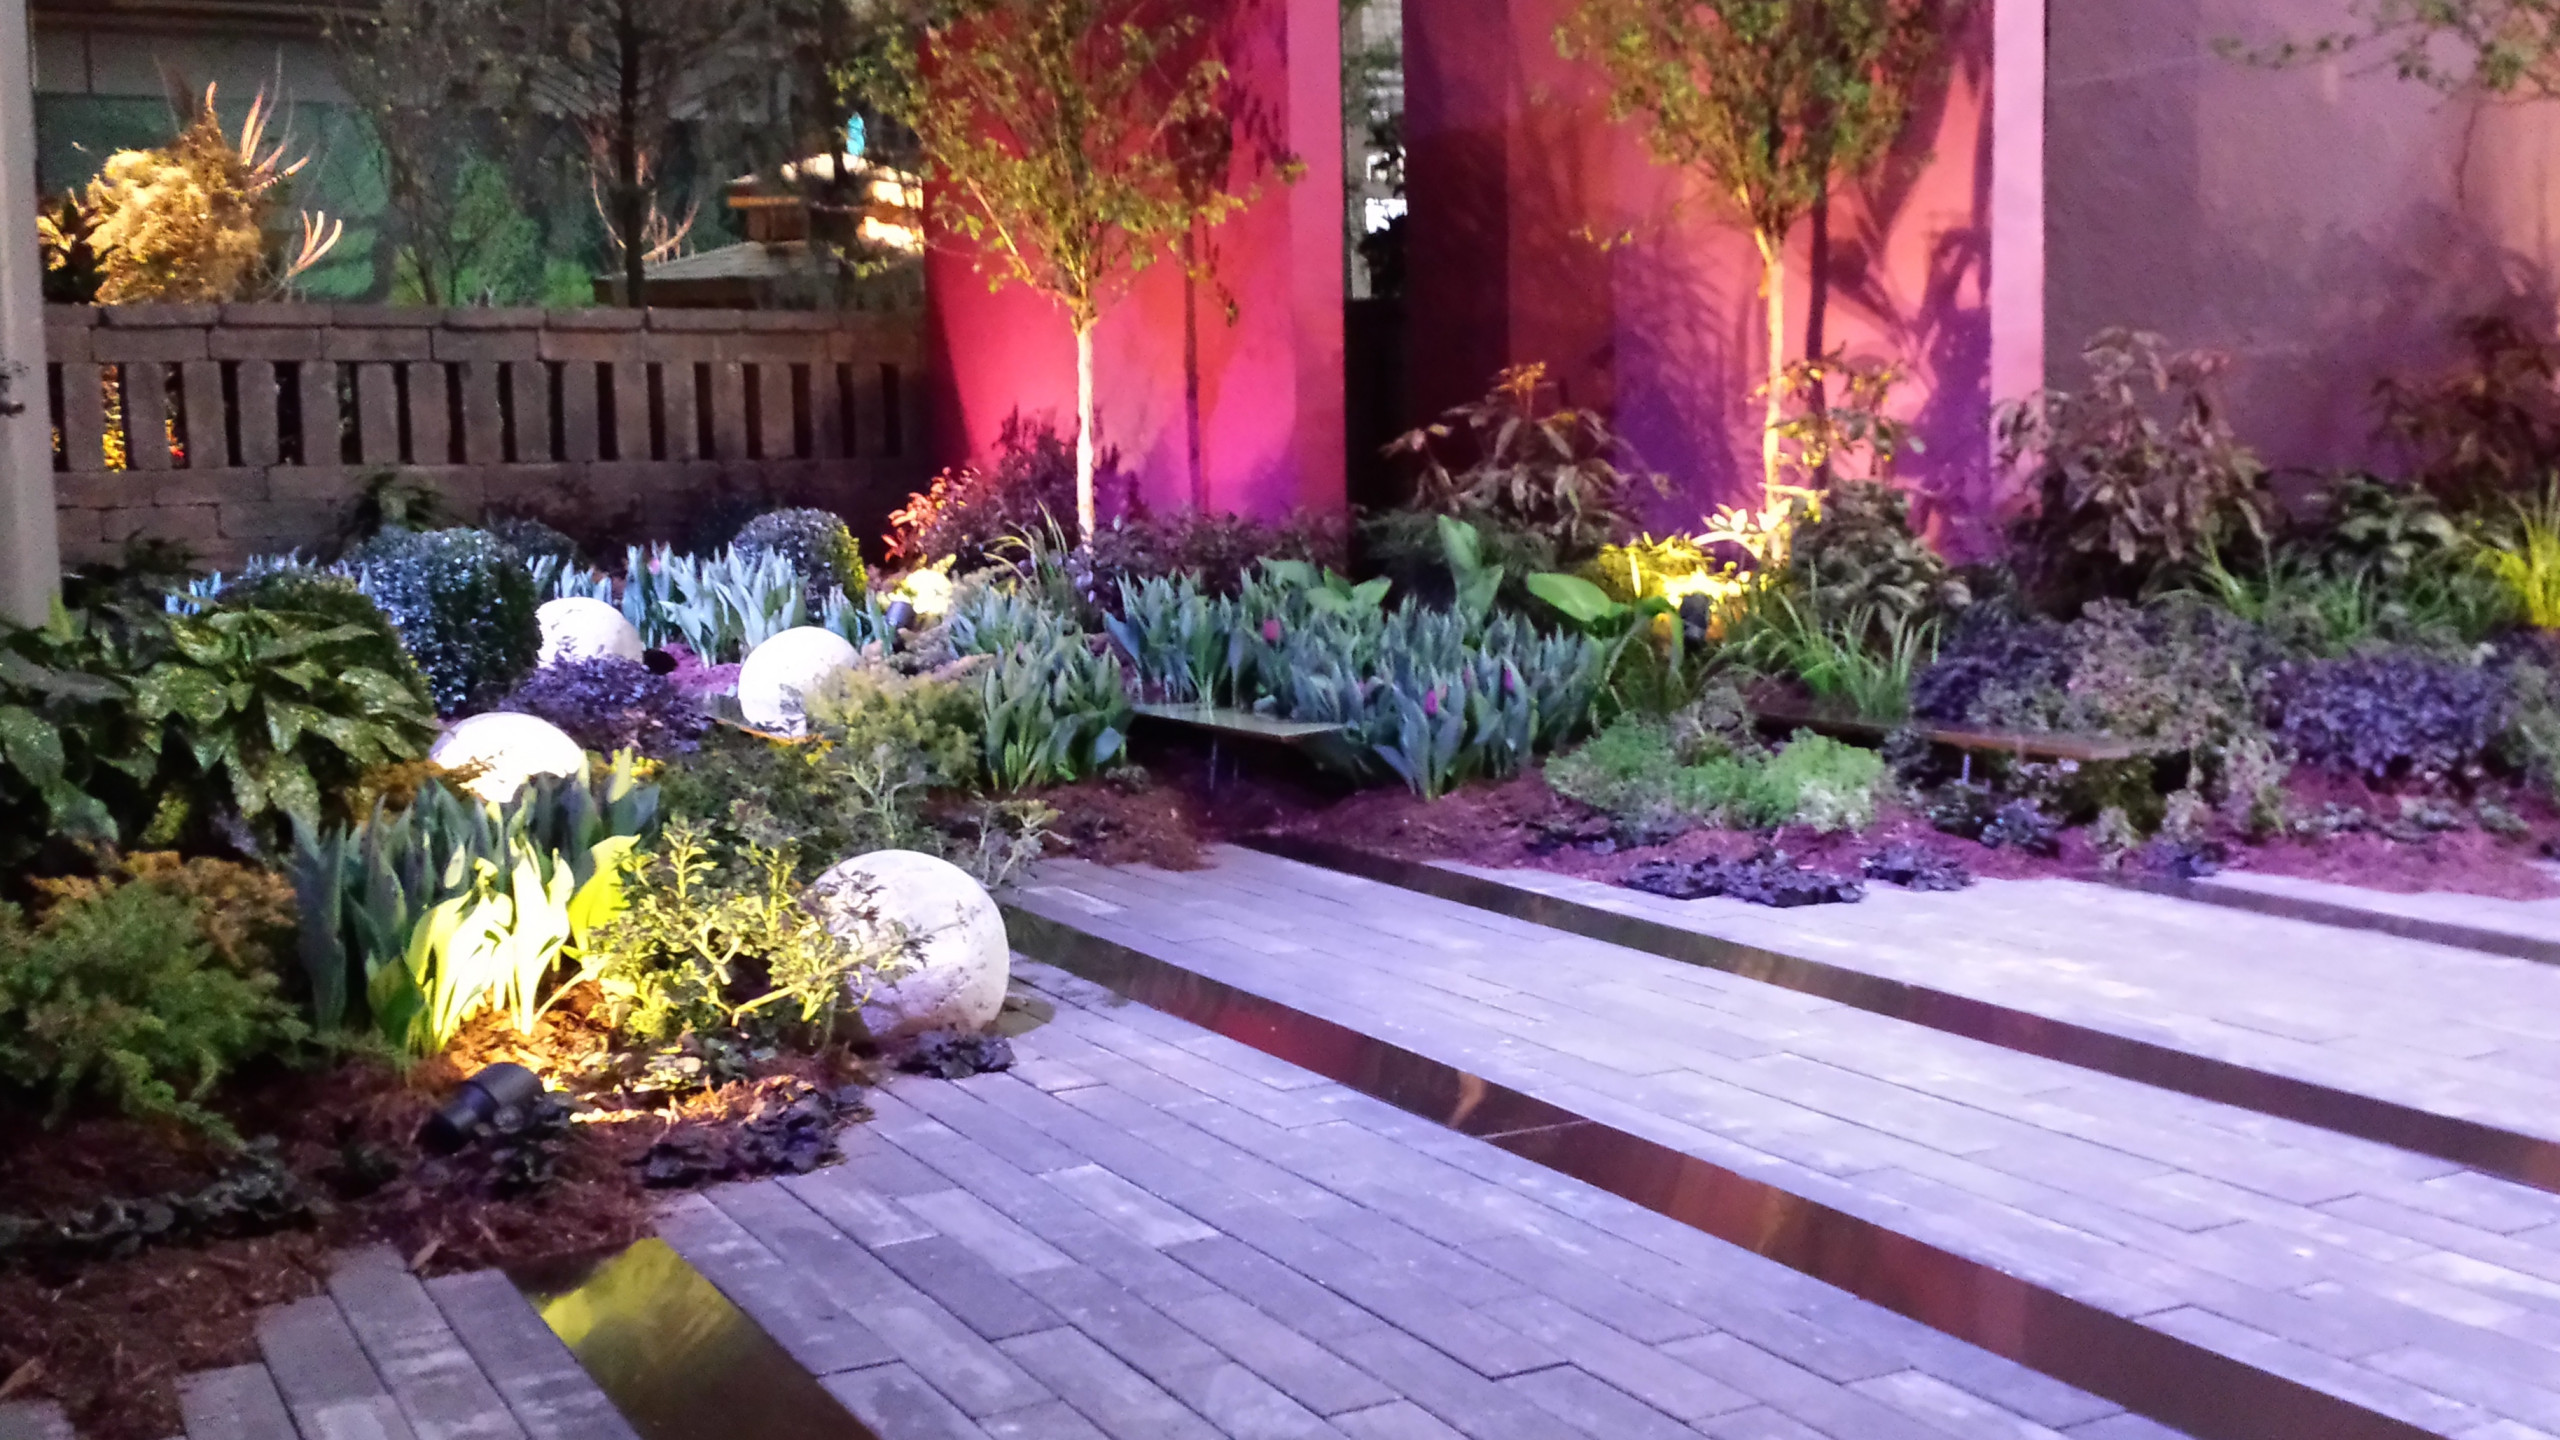 Southern Spring Home and Garden Show Entry 2015